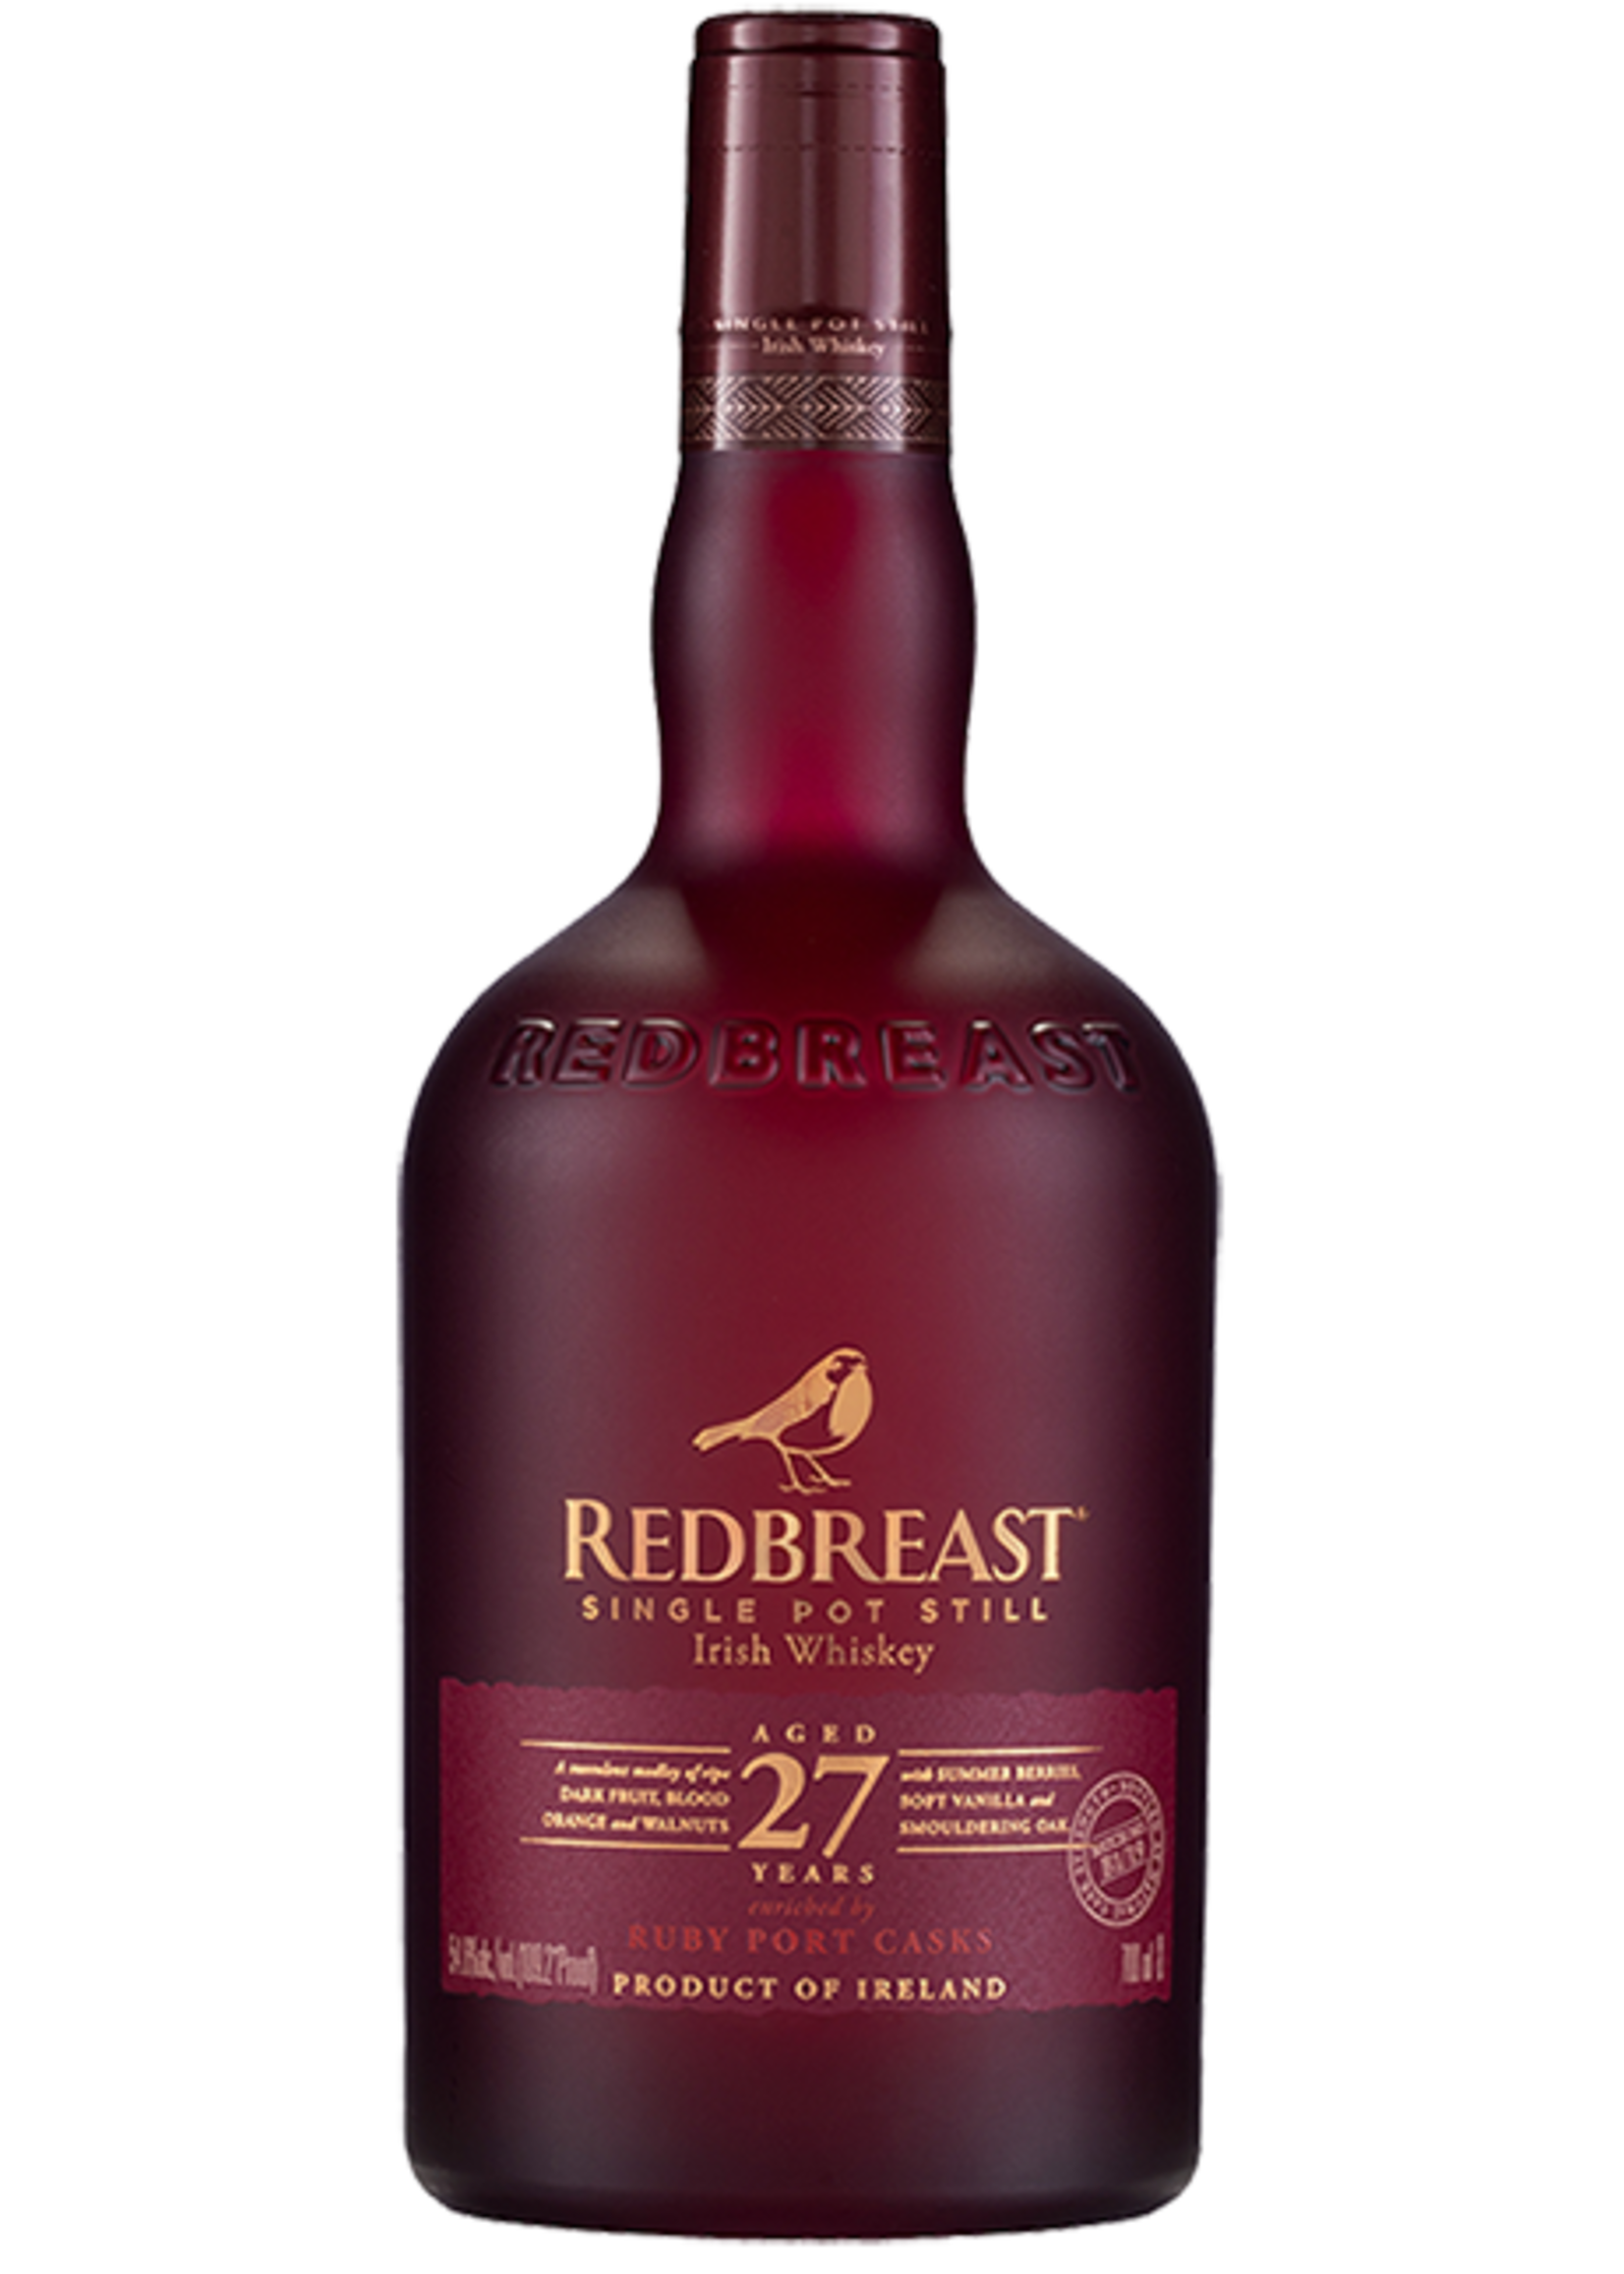 Redbreast Redbreast Whiskey / 27 Year Old Ruby Port Cask Single Pot Still Irish Whiskey / 750mL / call for batch number